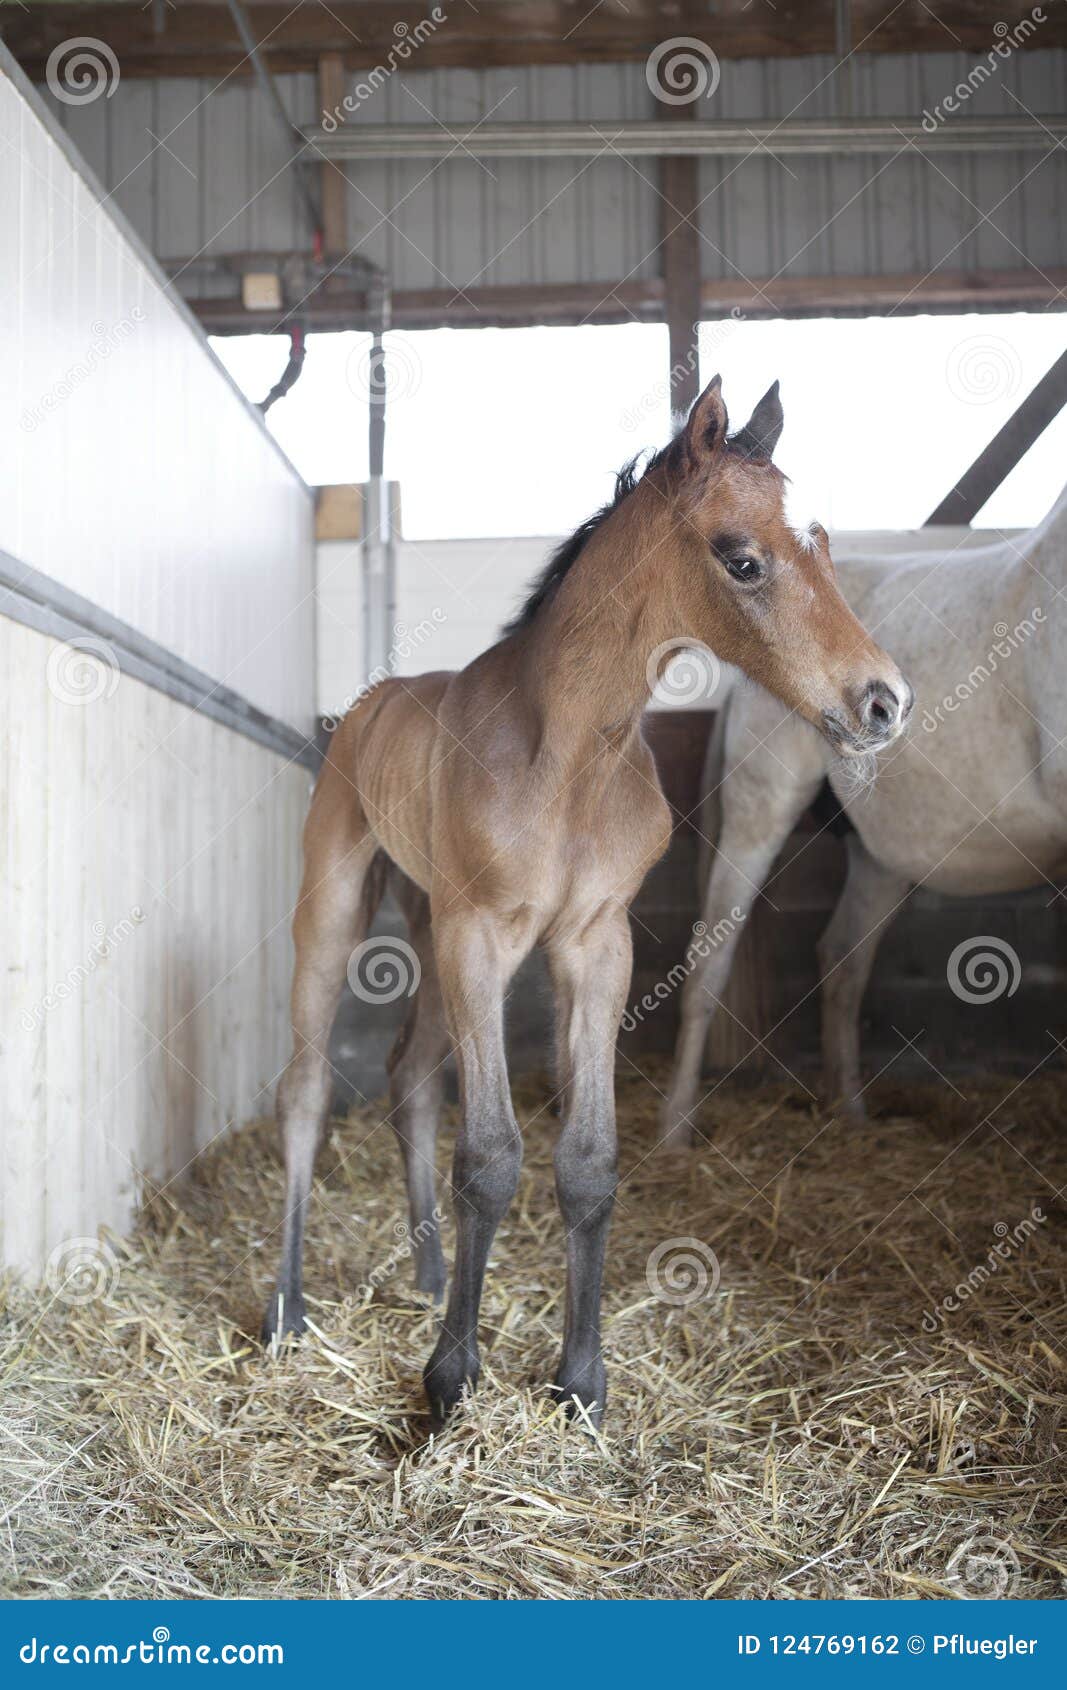 baby born horse stable